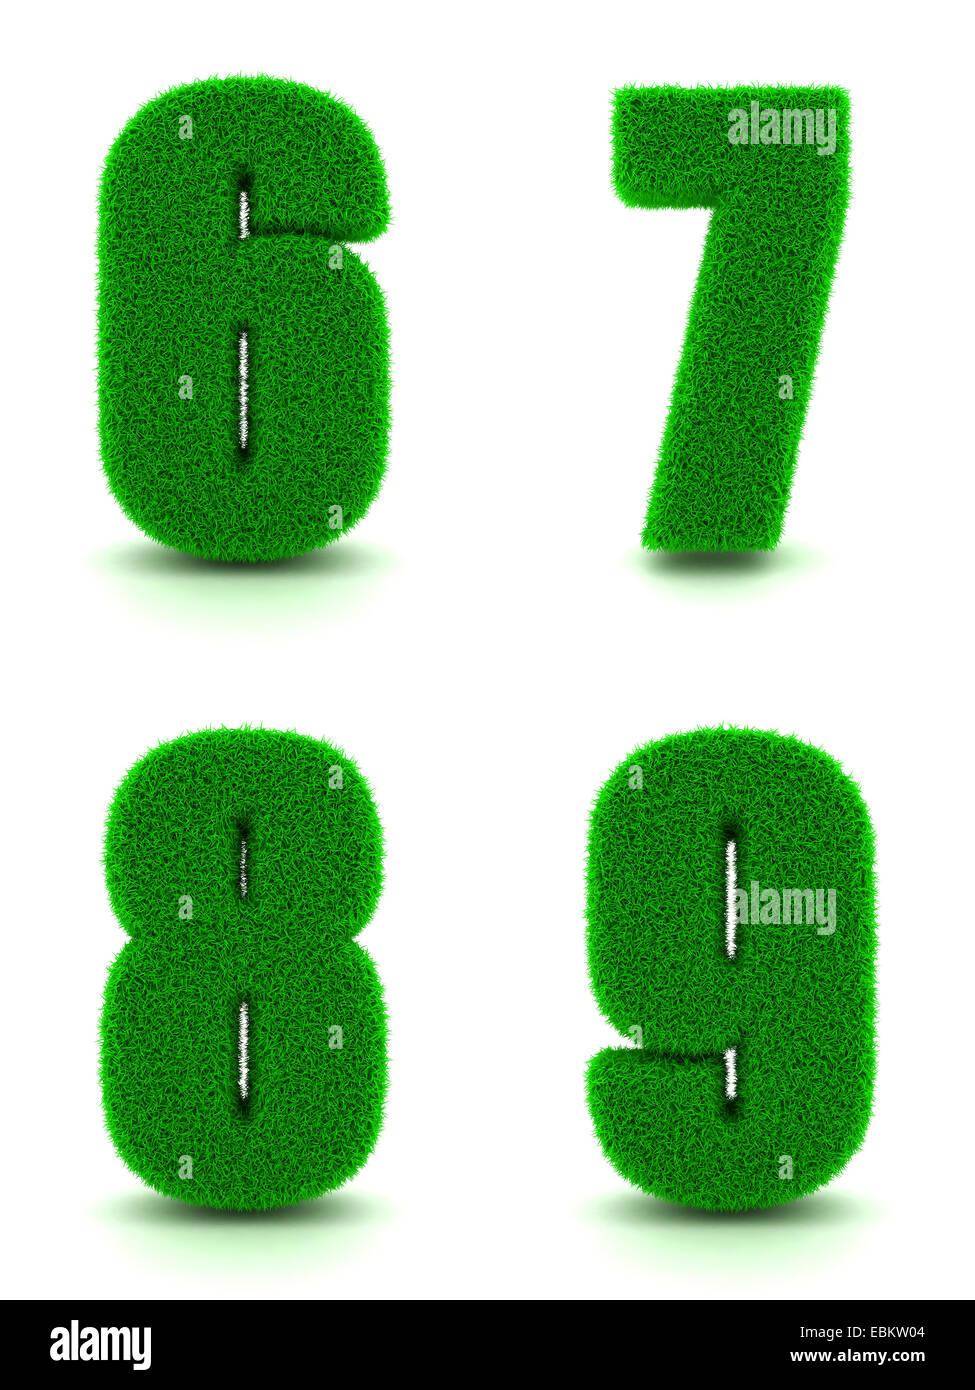 Digits 6, 7, 8, 9 - Set of Green Grass on White Background in 3d. Stock Photo